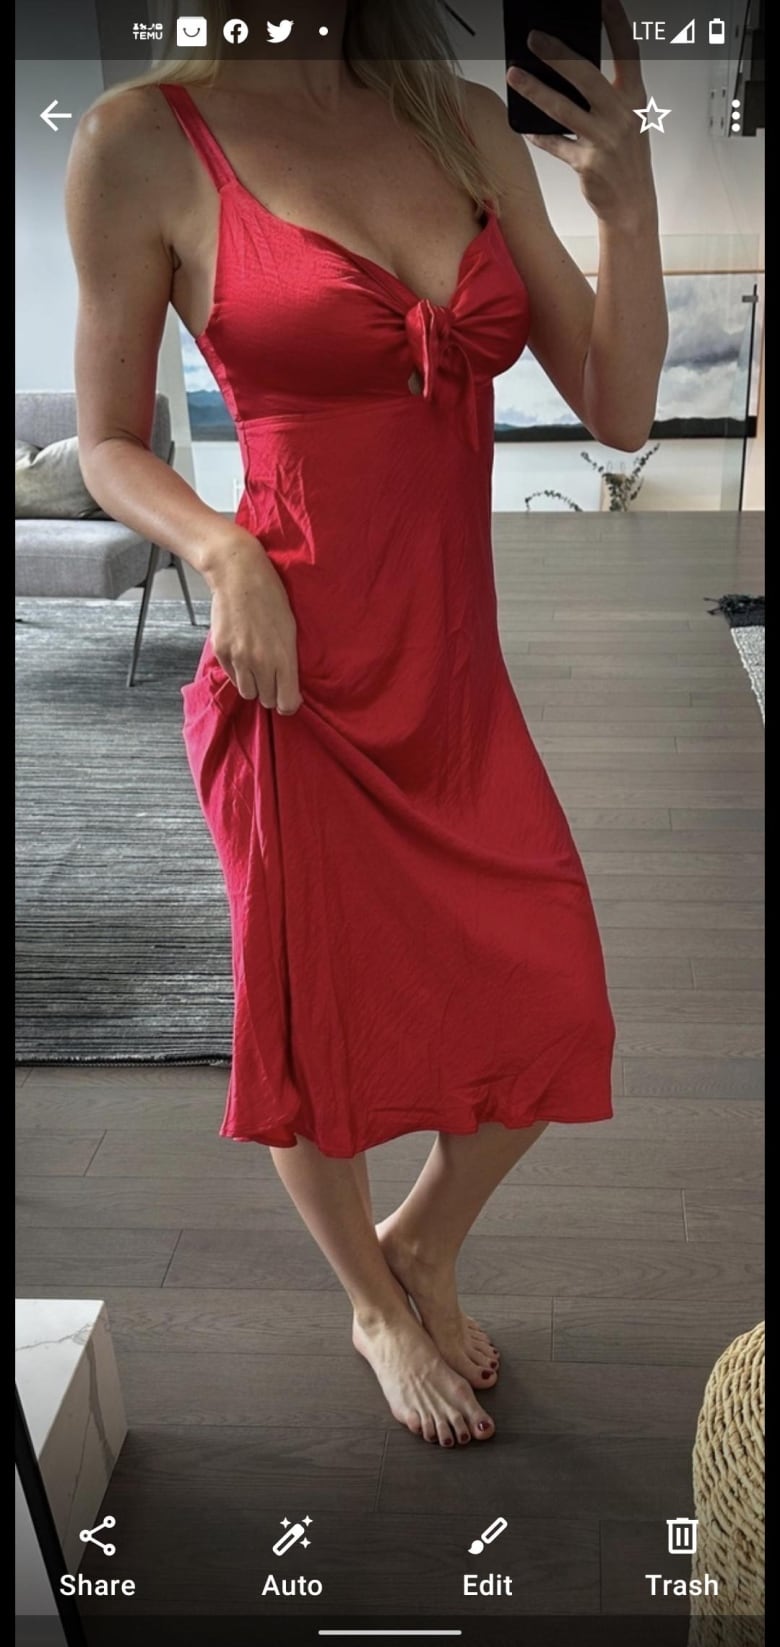 A screengrab of a mobile phone with a neck-down selfie of a woman in a red dress